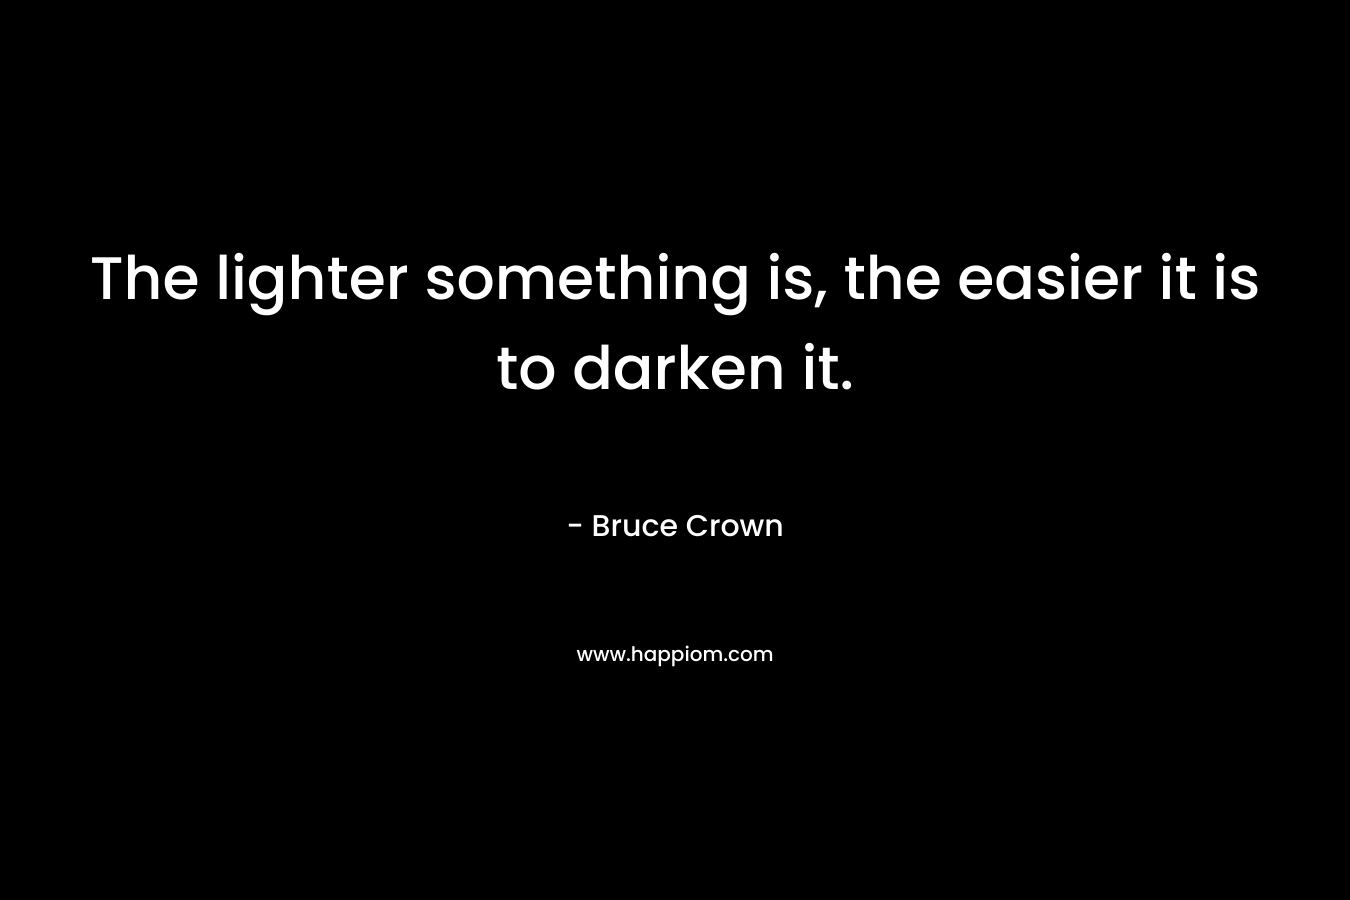 The lighter something is, the easier it is to darken it.